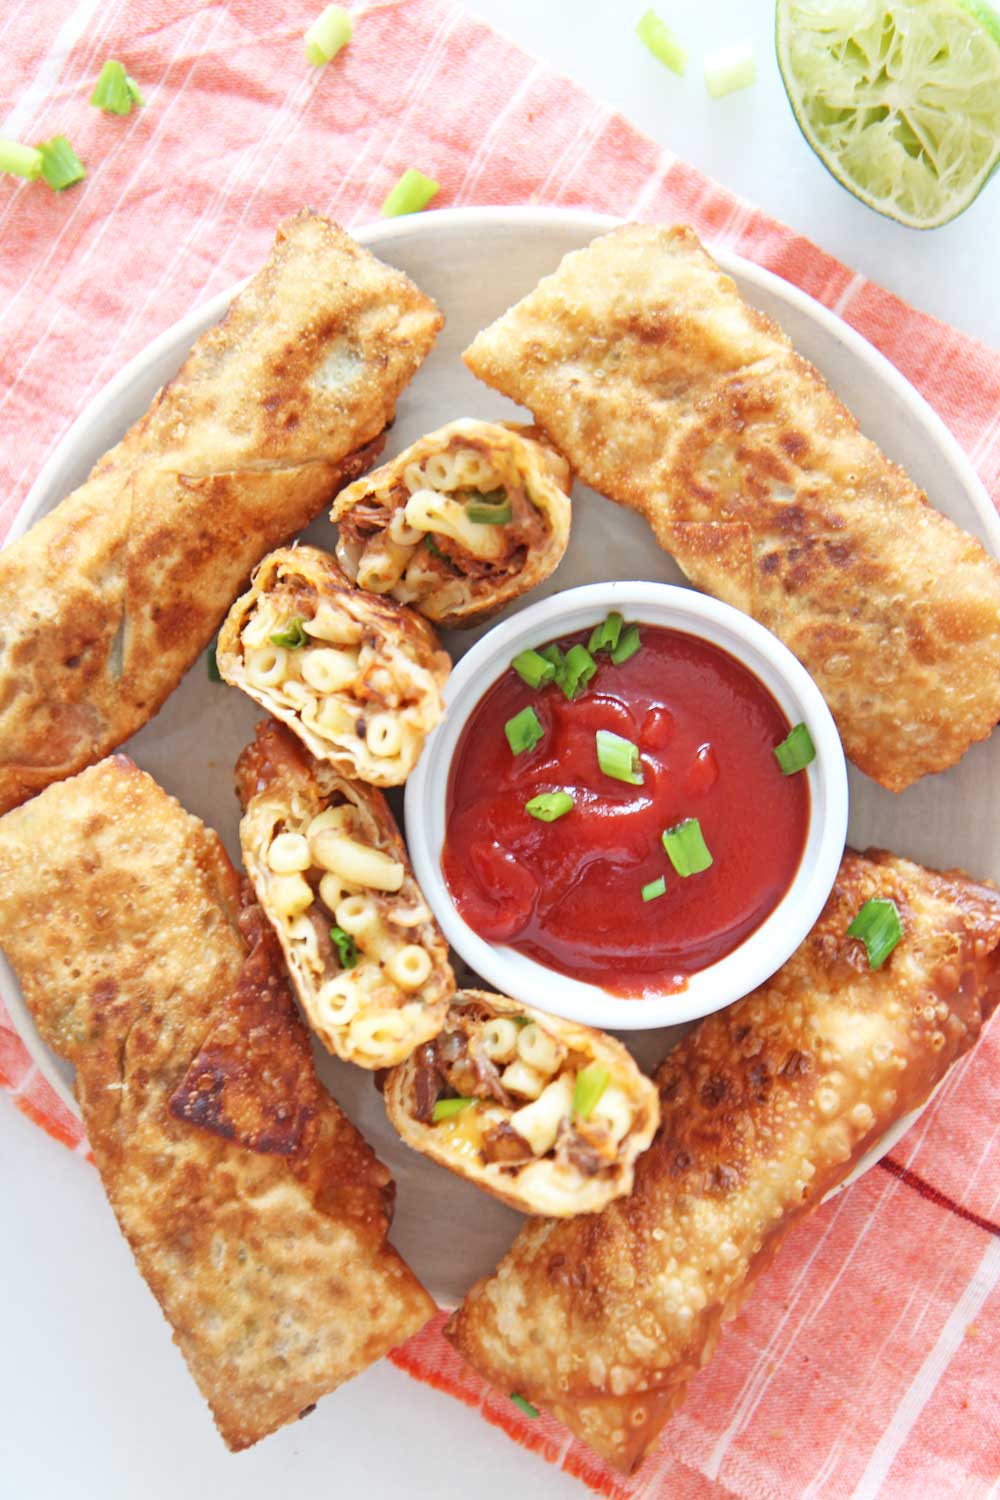 Leftover Mac and Cheese Egg rolls. Leftover Mac and cheese, short ribs, scallions, and lime make this the perfect leftover remake! www.ChopHappy.com #leftovers #eggrolls